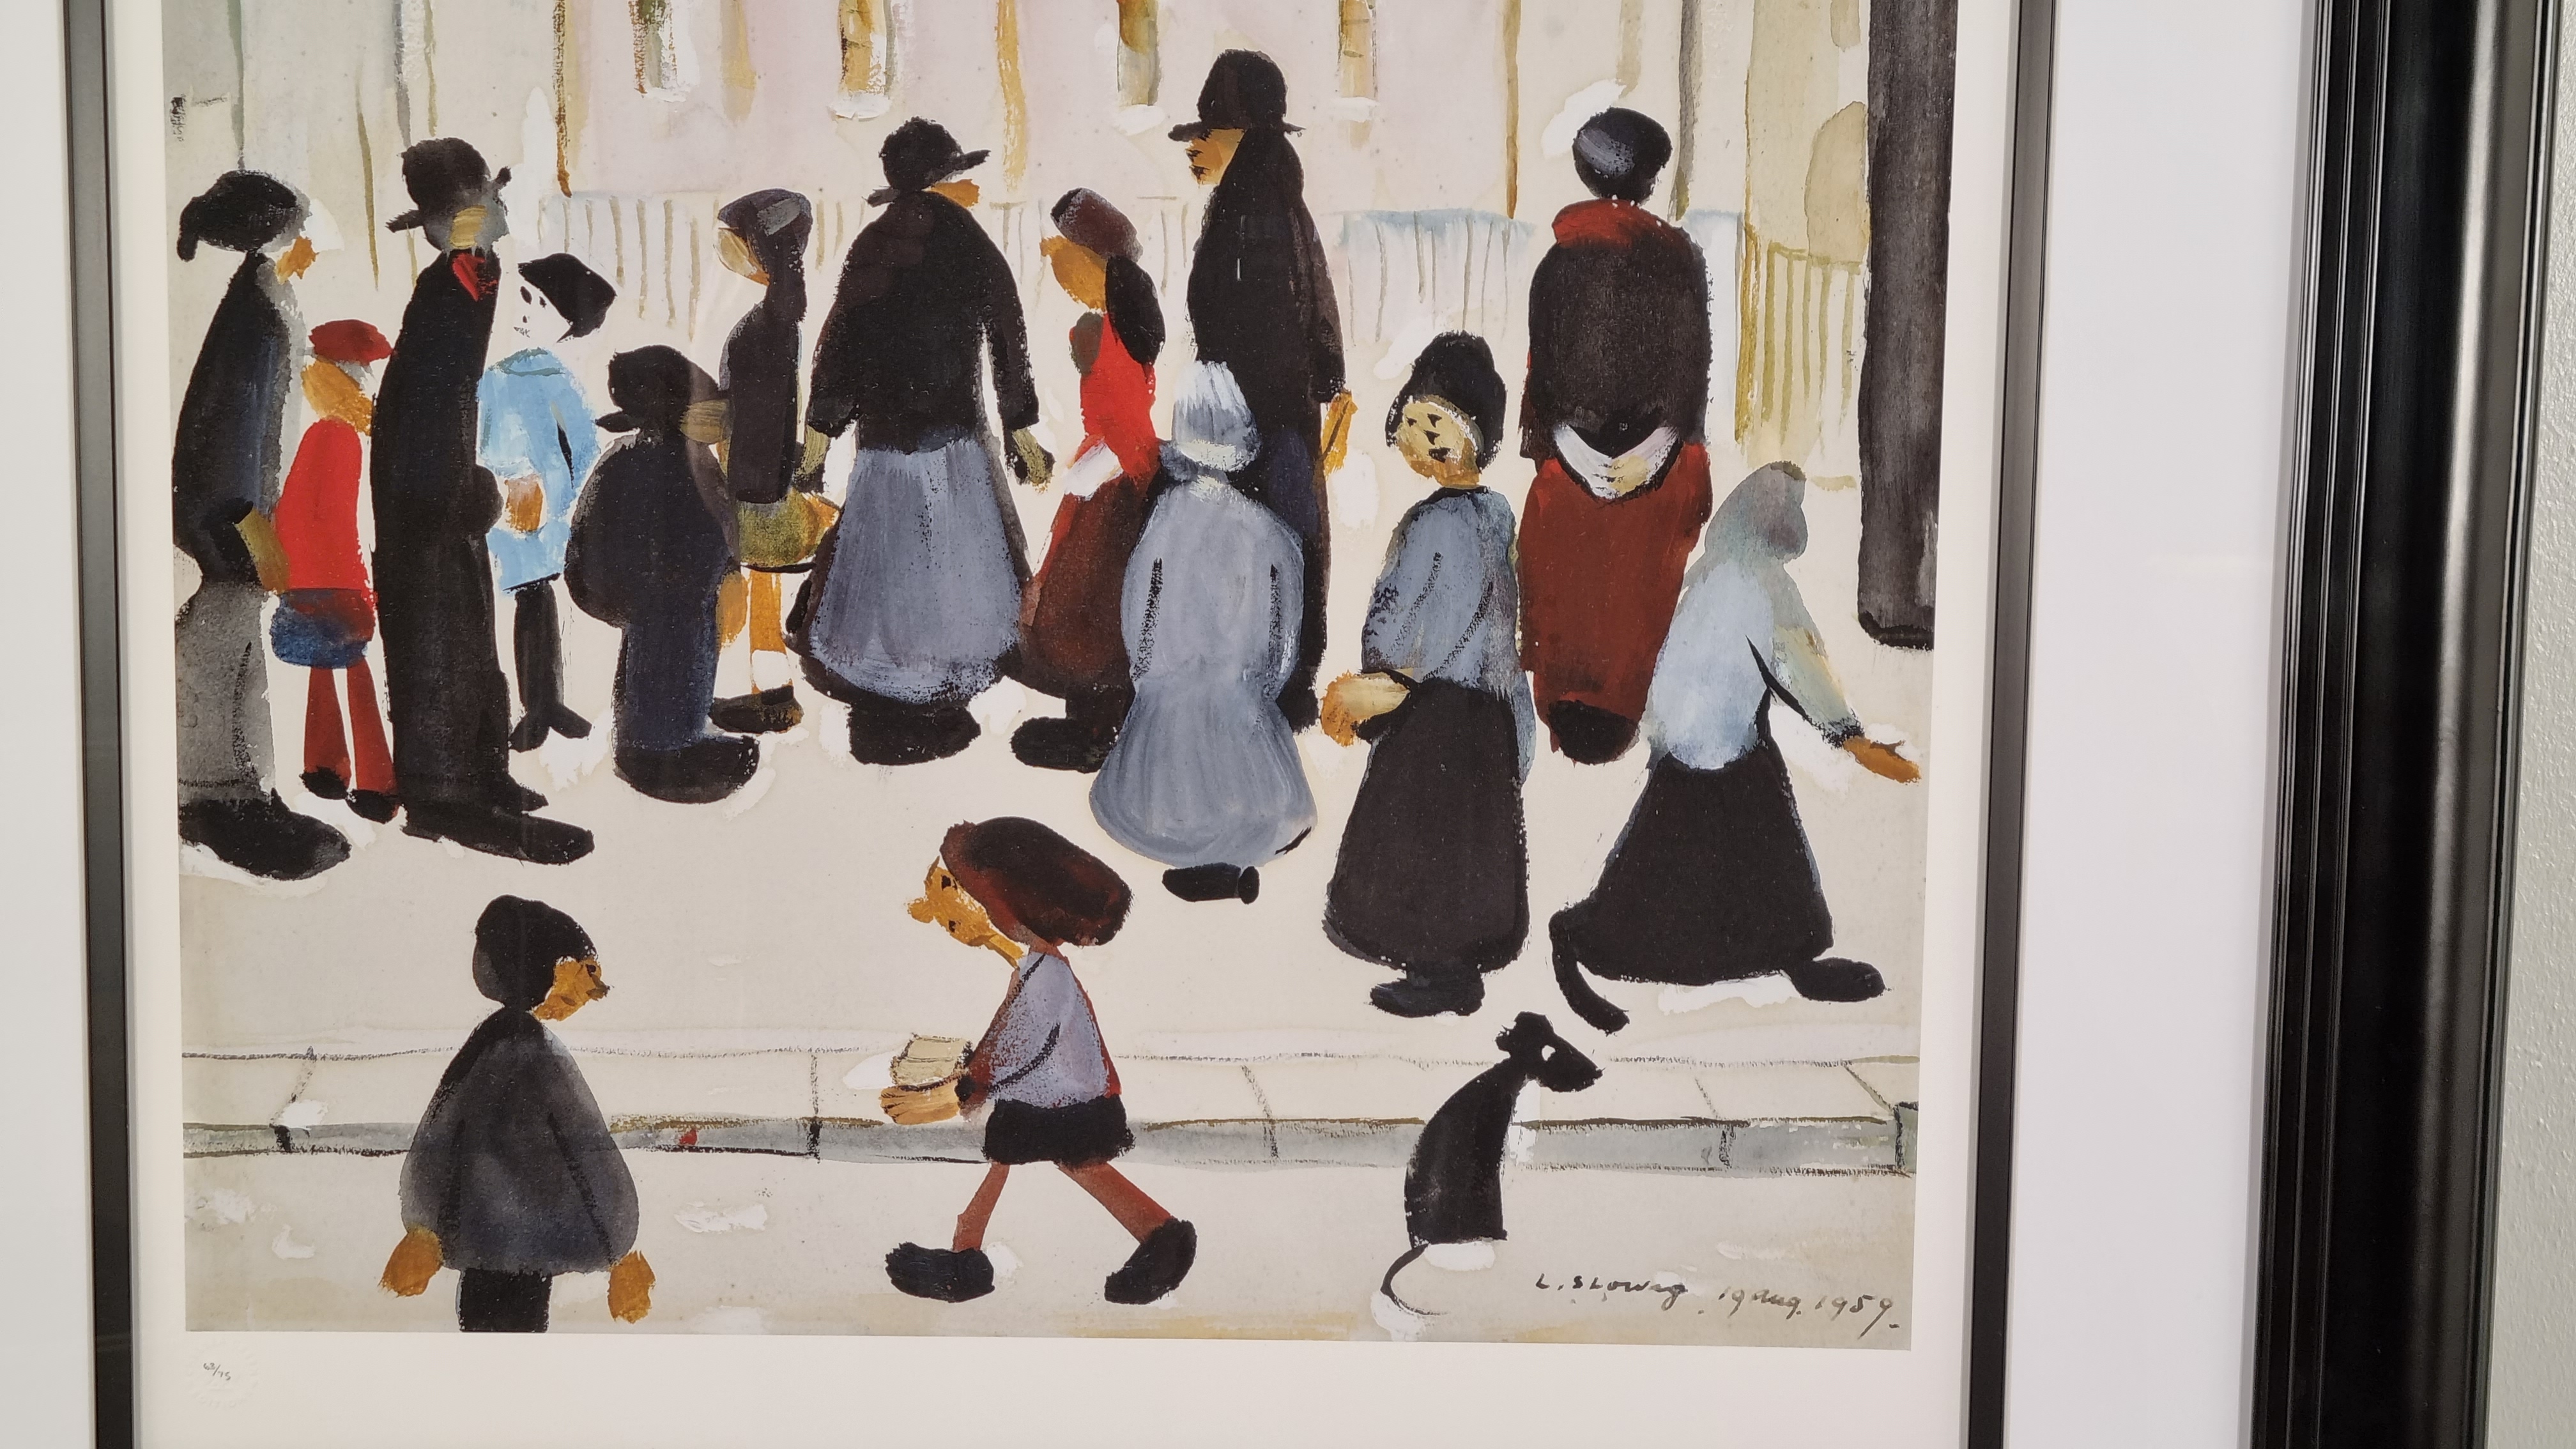 Limited Edition L.S. Lowry "Group of People, 1959" - Image 4 of 4